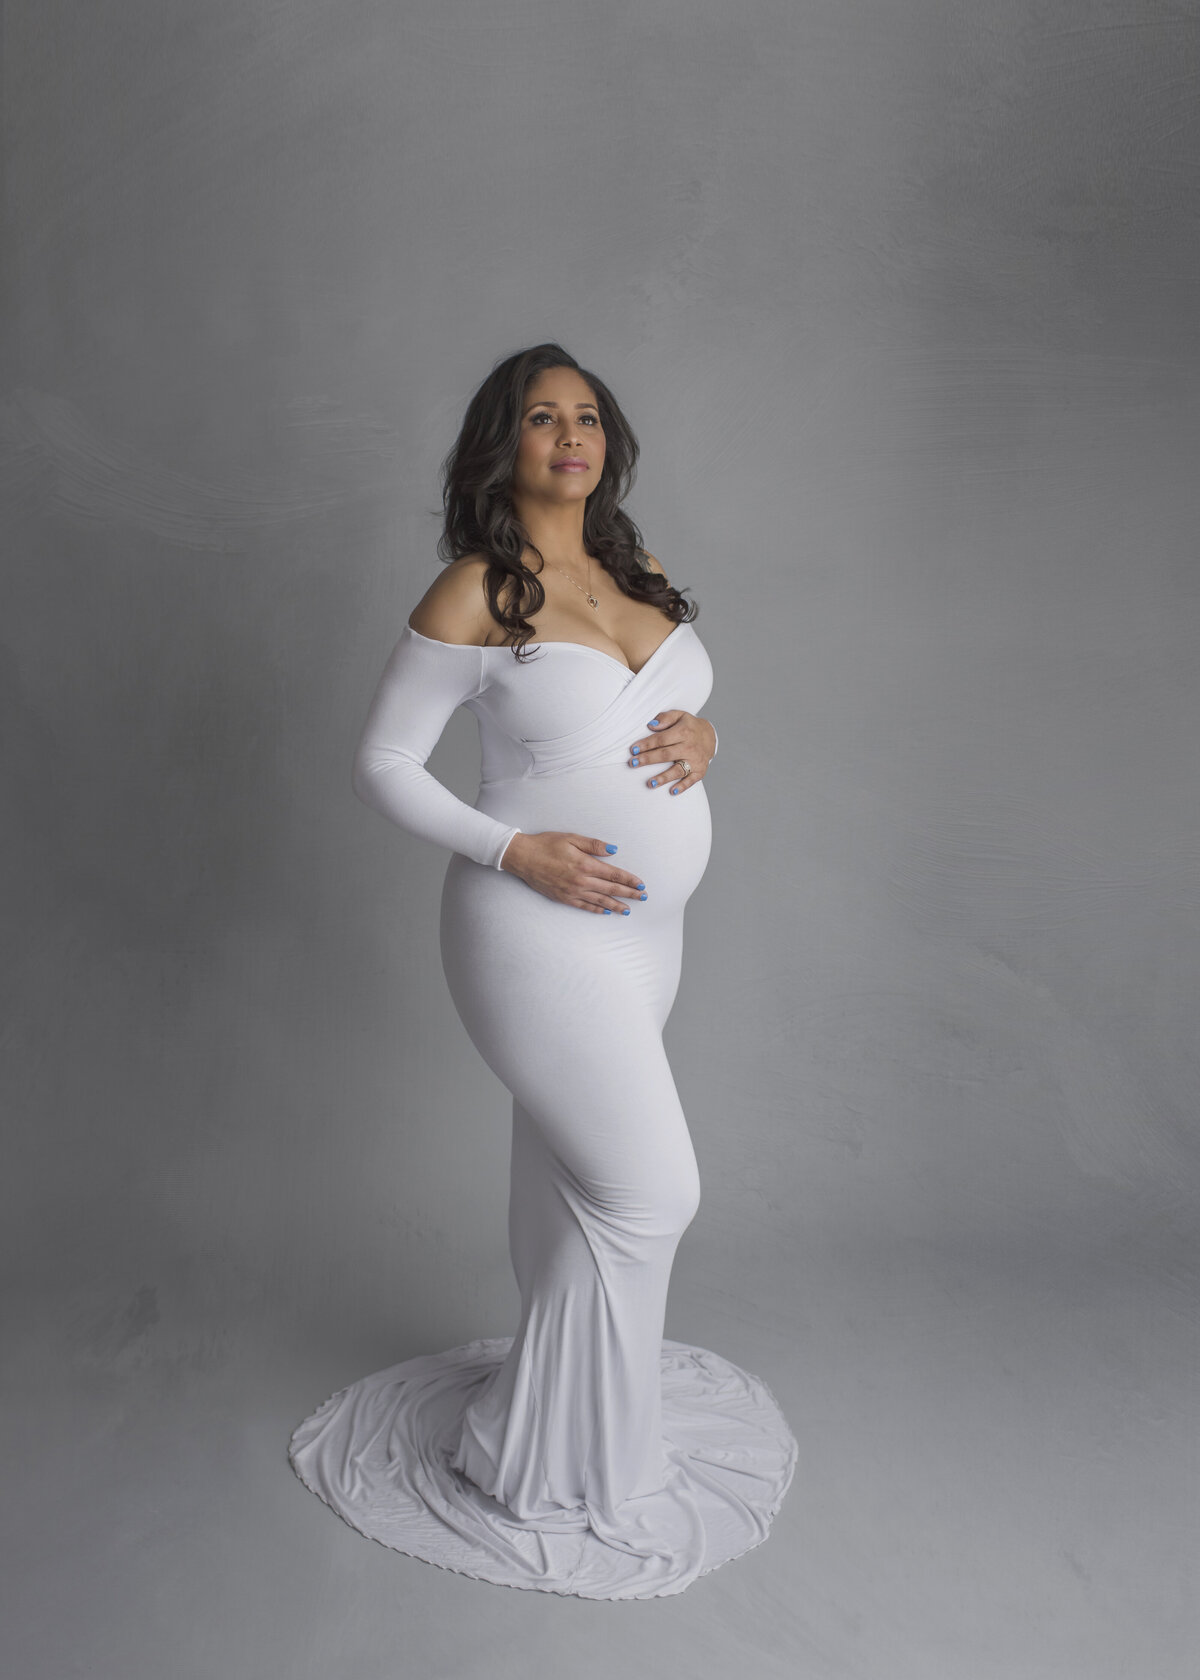 inside studio maternity session of lady in white dress matching background